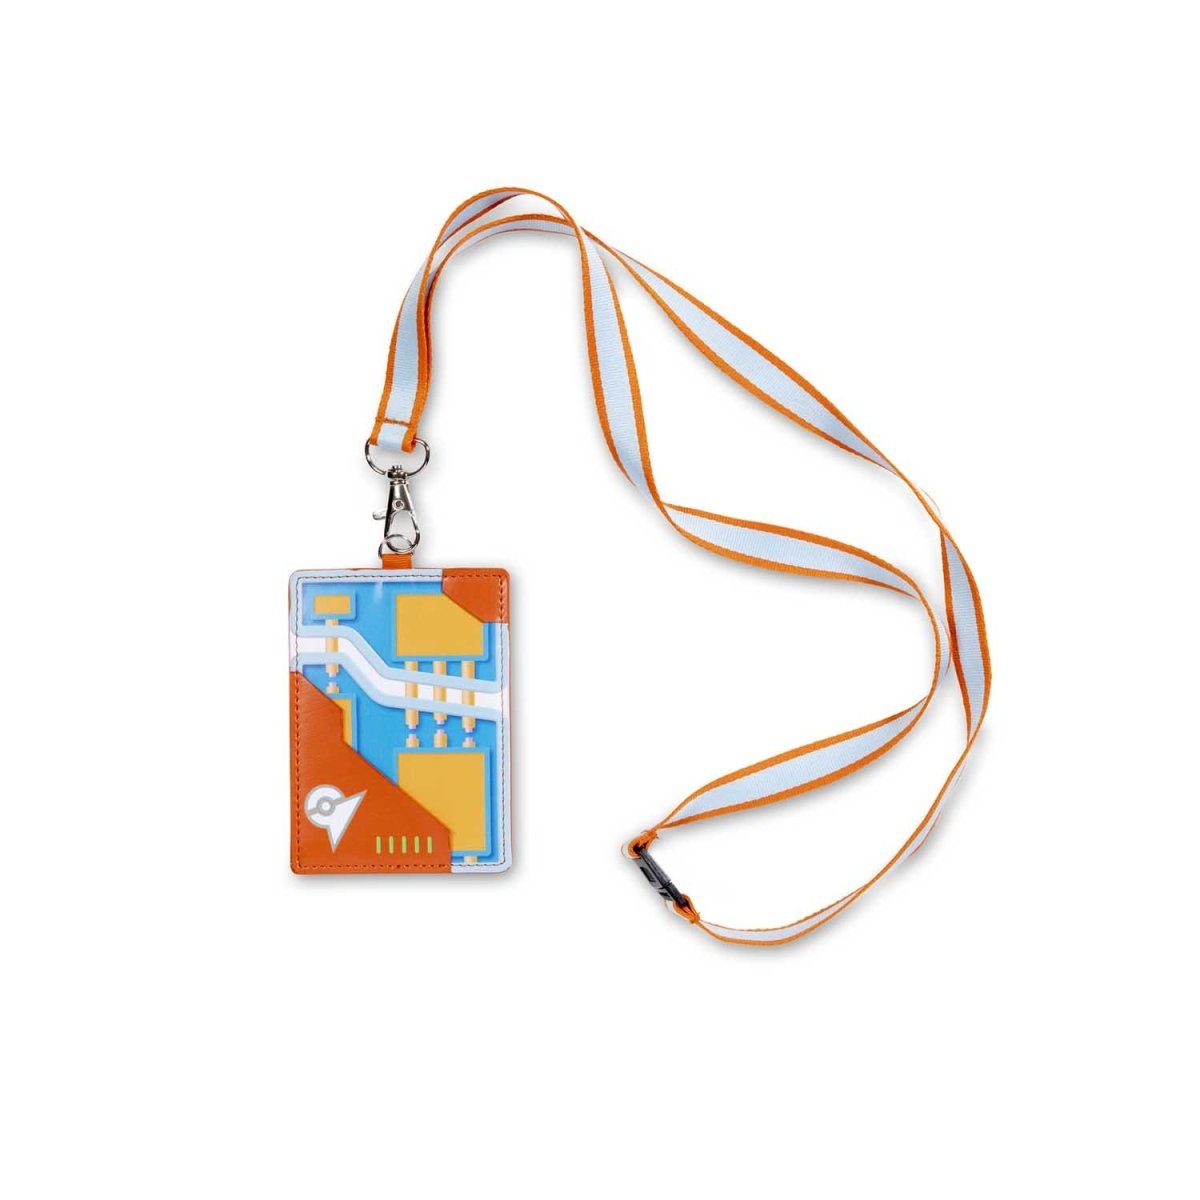 Down Syndrome Lanyard and Badge Holder